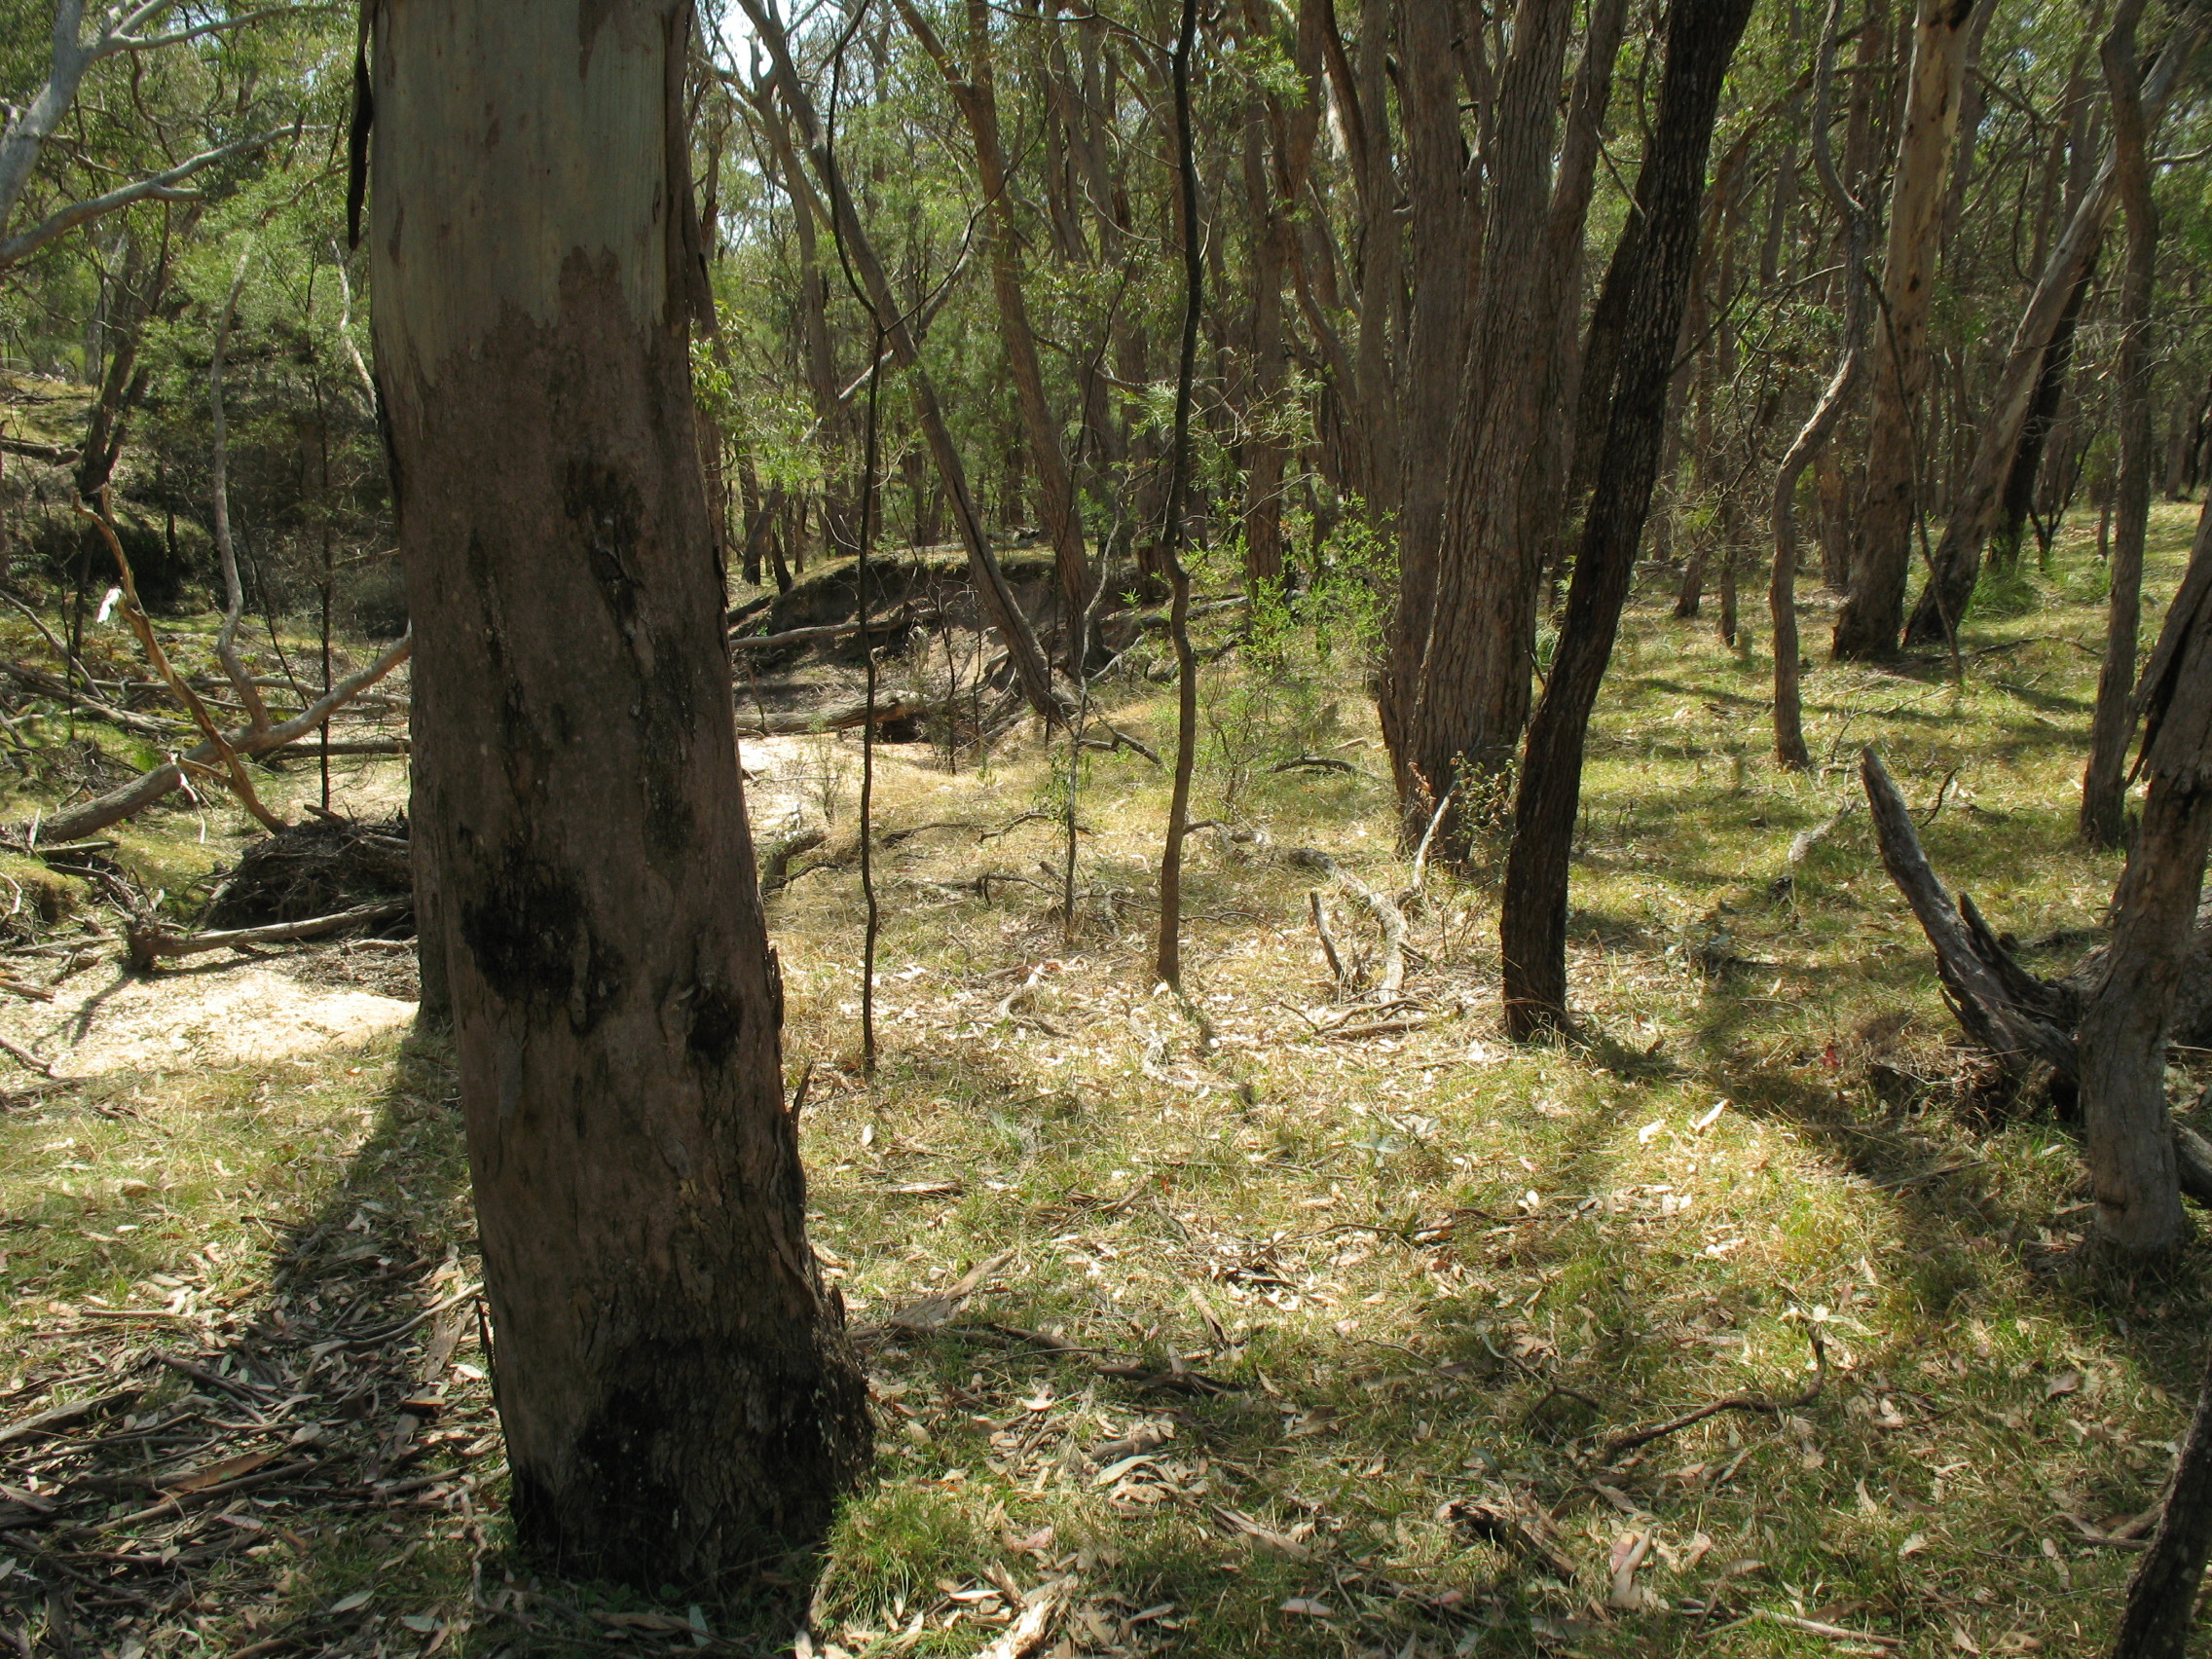 White Box Yellow Box Blakely’s Red Gum Woodland, Riparian grassy Blakely's Red Gum Woodland, Threatened Ecological Community